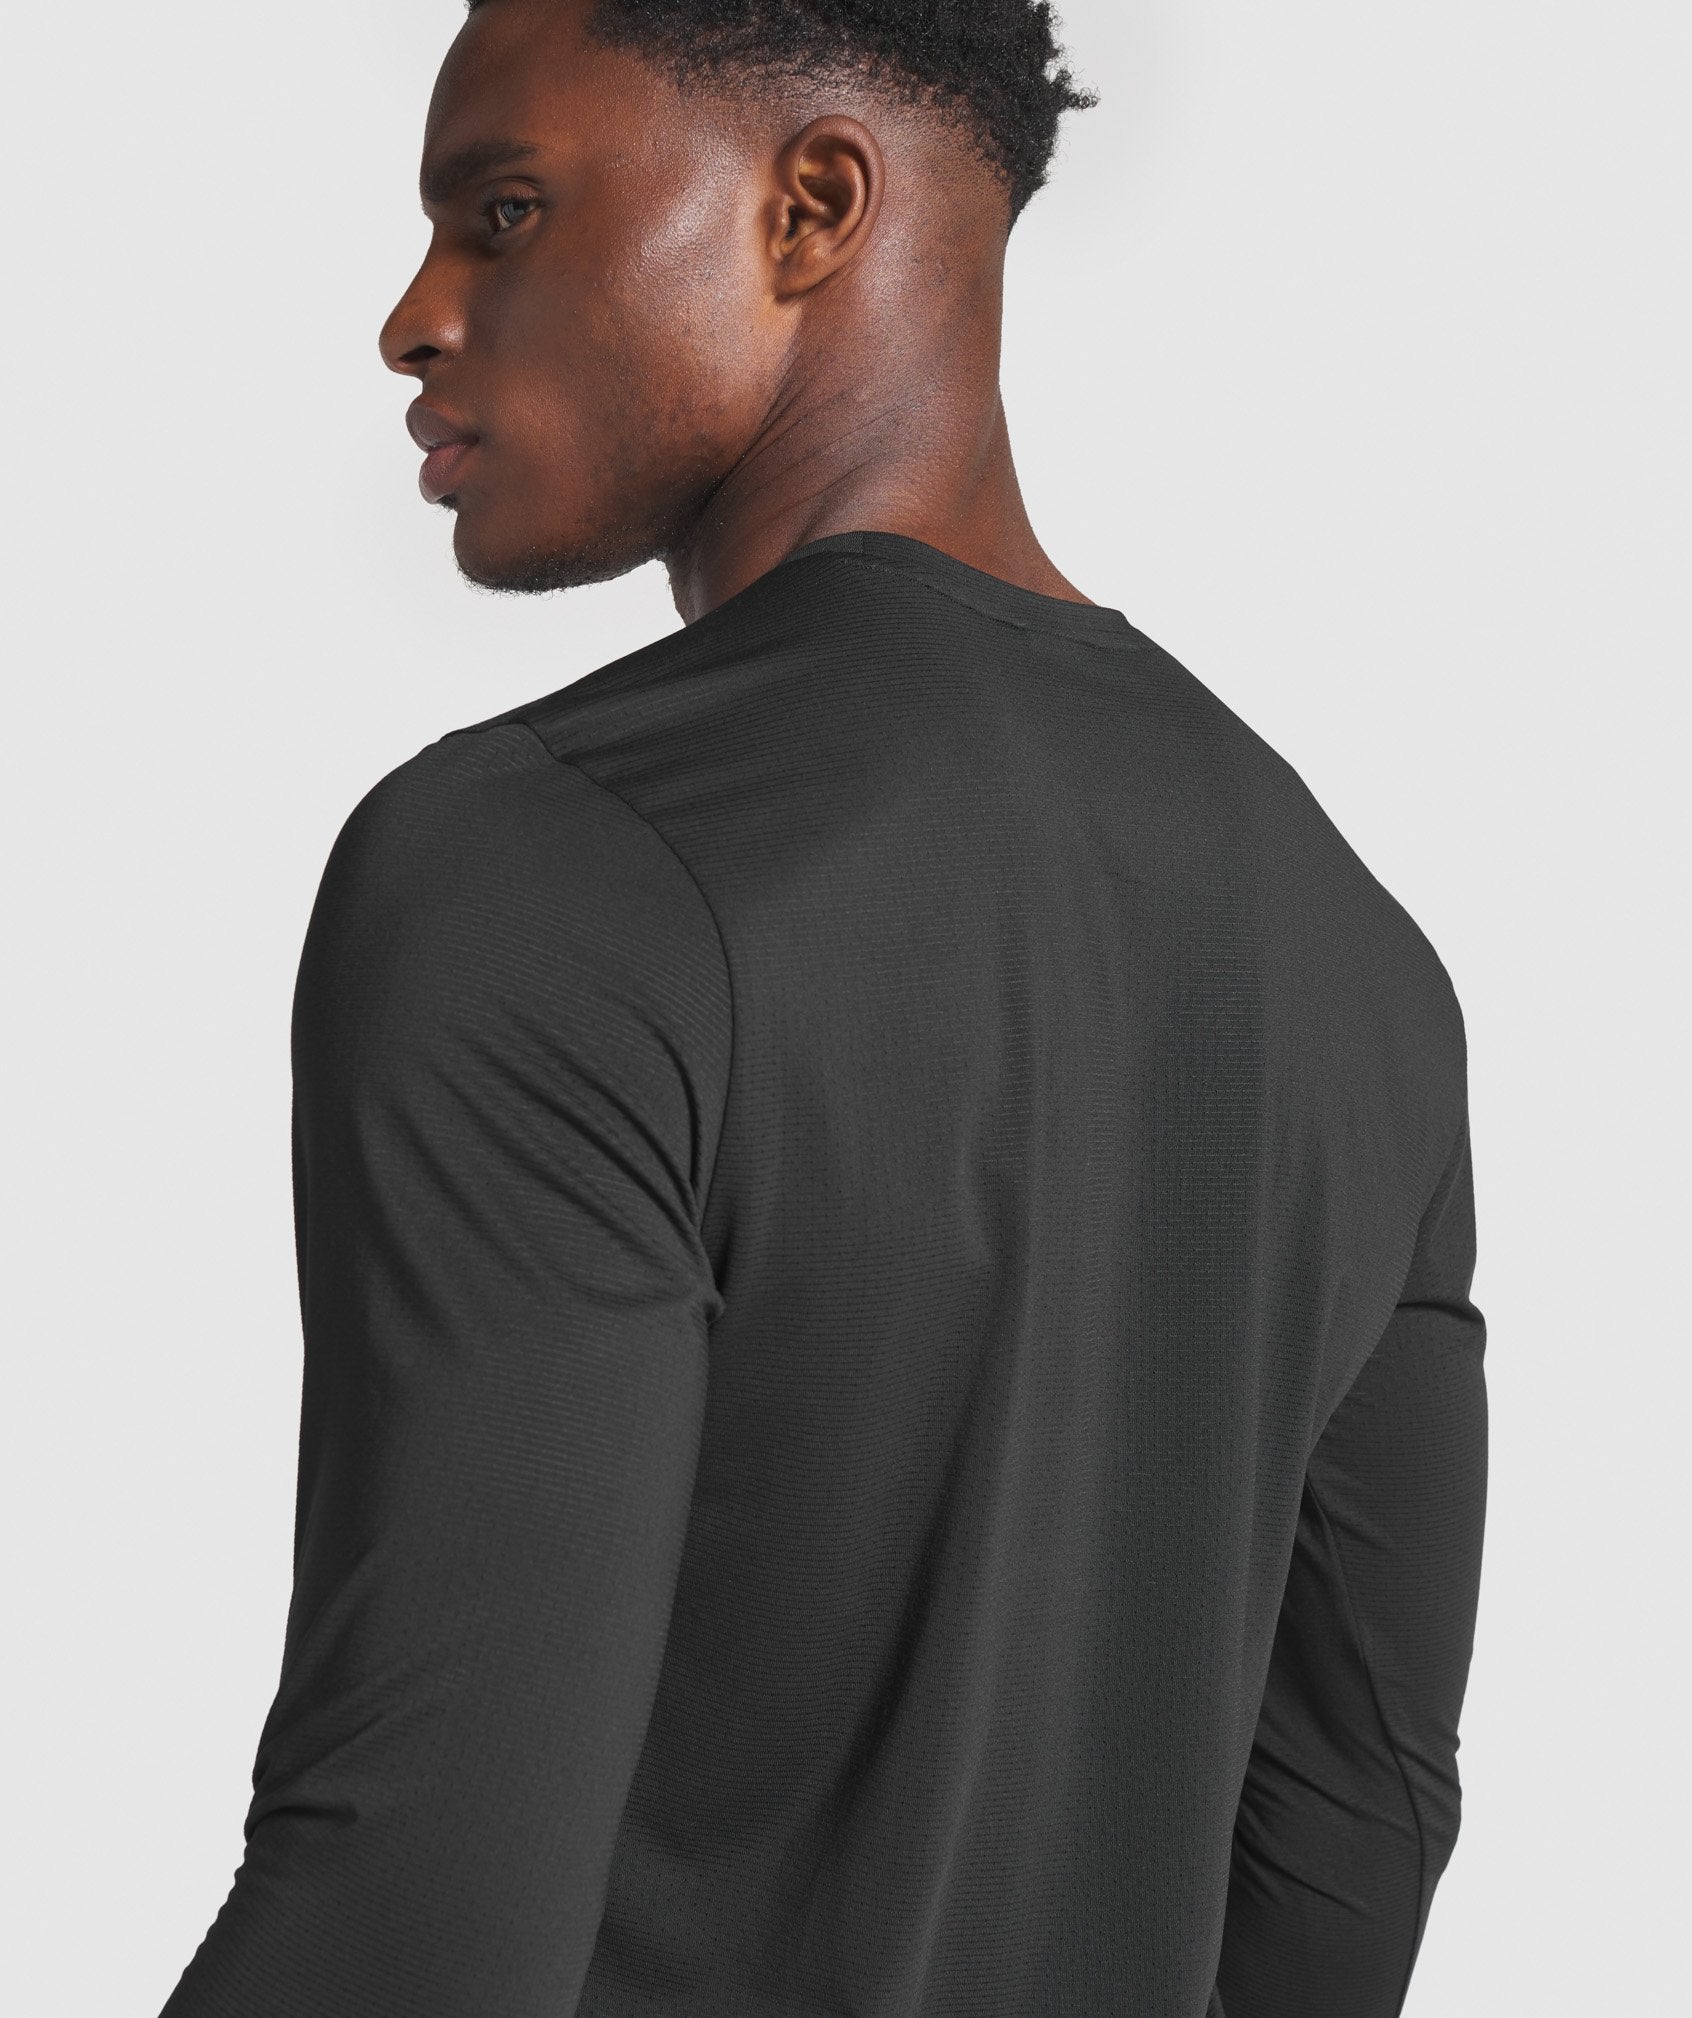 Arrival Long Sleeve Graphic T-Shirt in Black - view 7